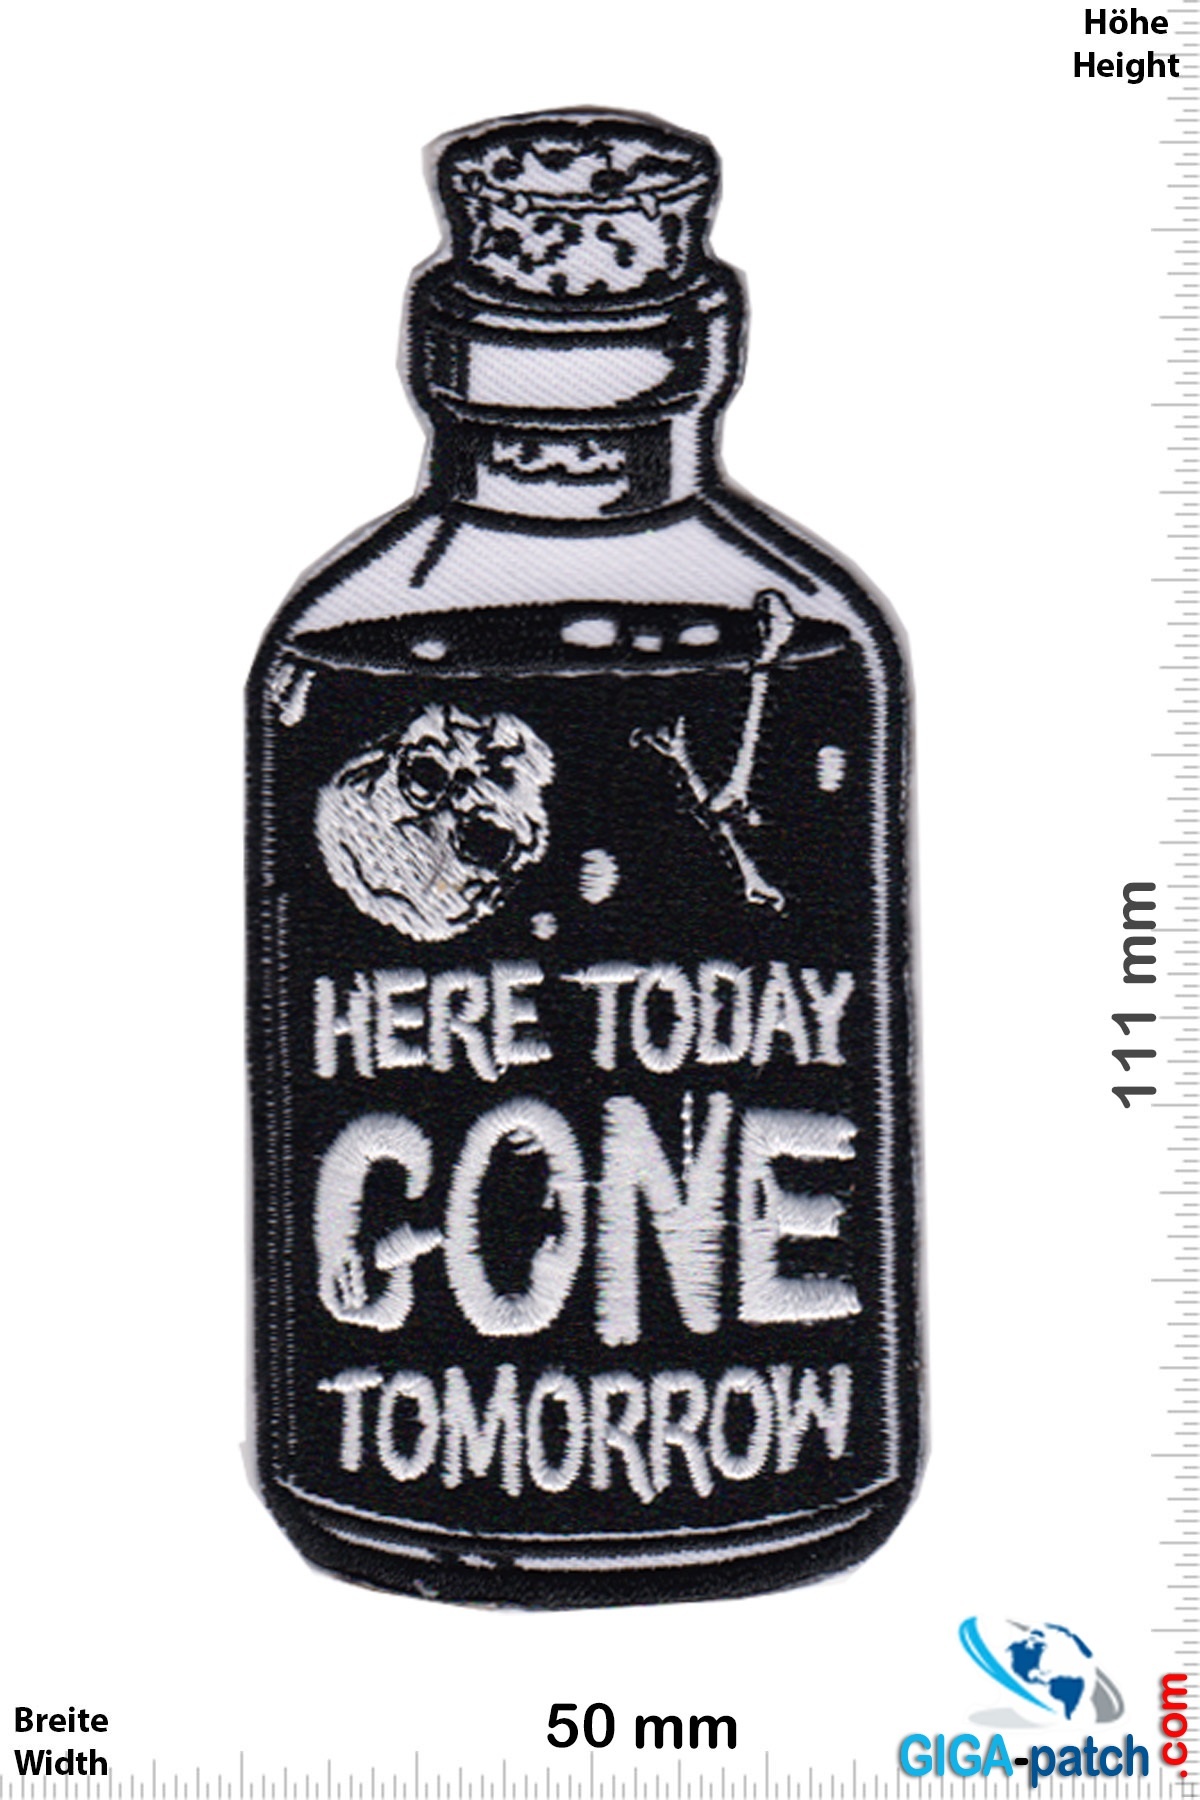 Oldschool Here Today Gone Tomorrow Posion Patch Back Patches Patch Keychains Stickers Giga Patch Com Biggest Patch Shop Worldwide